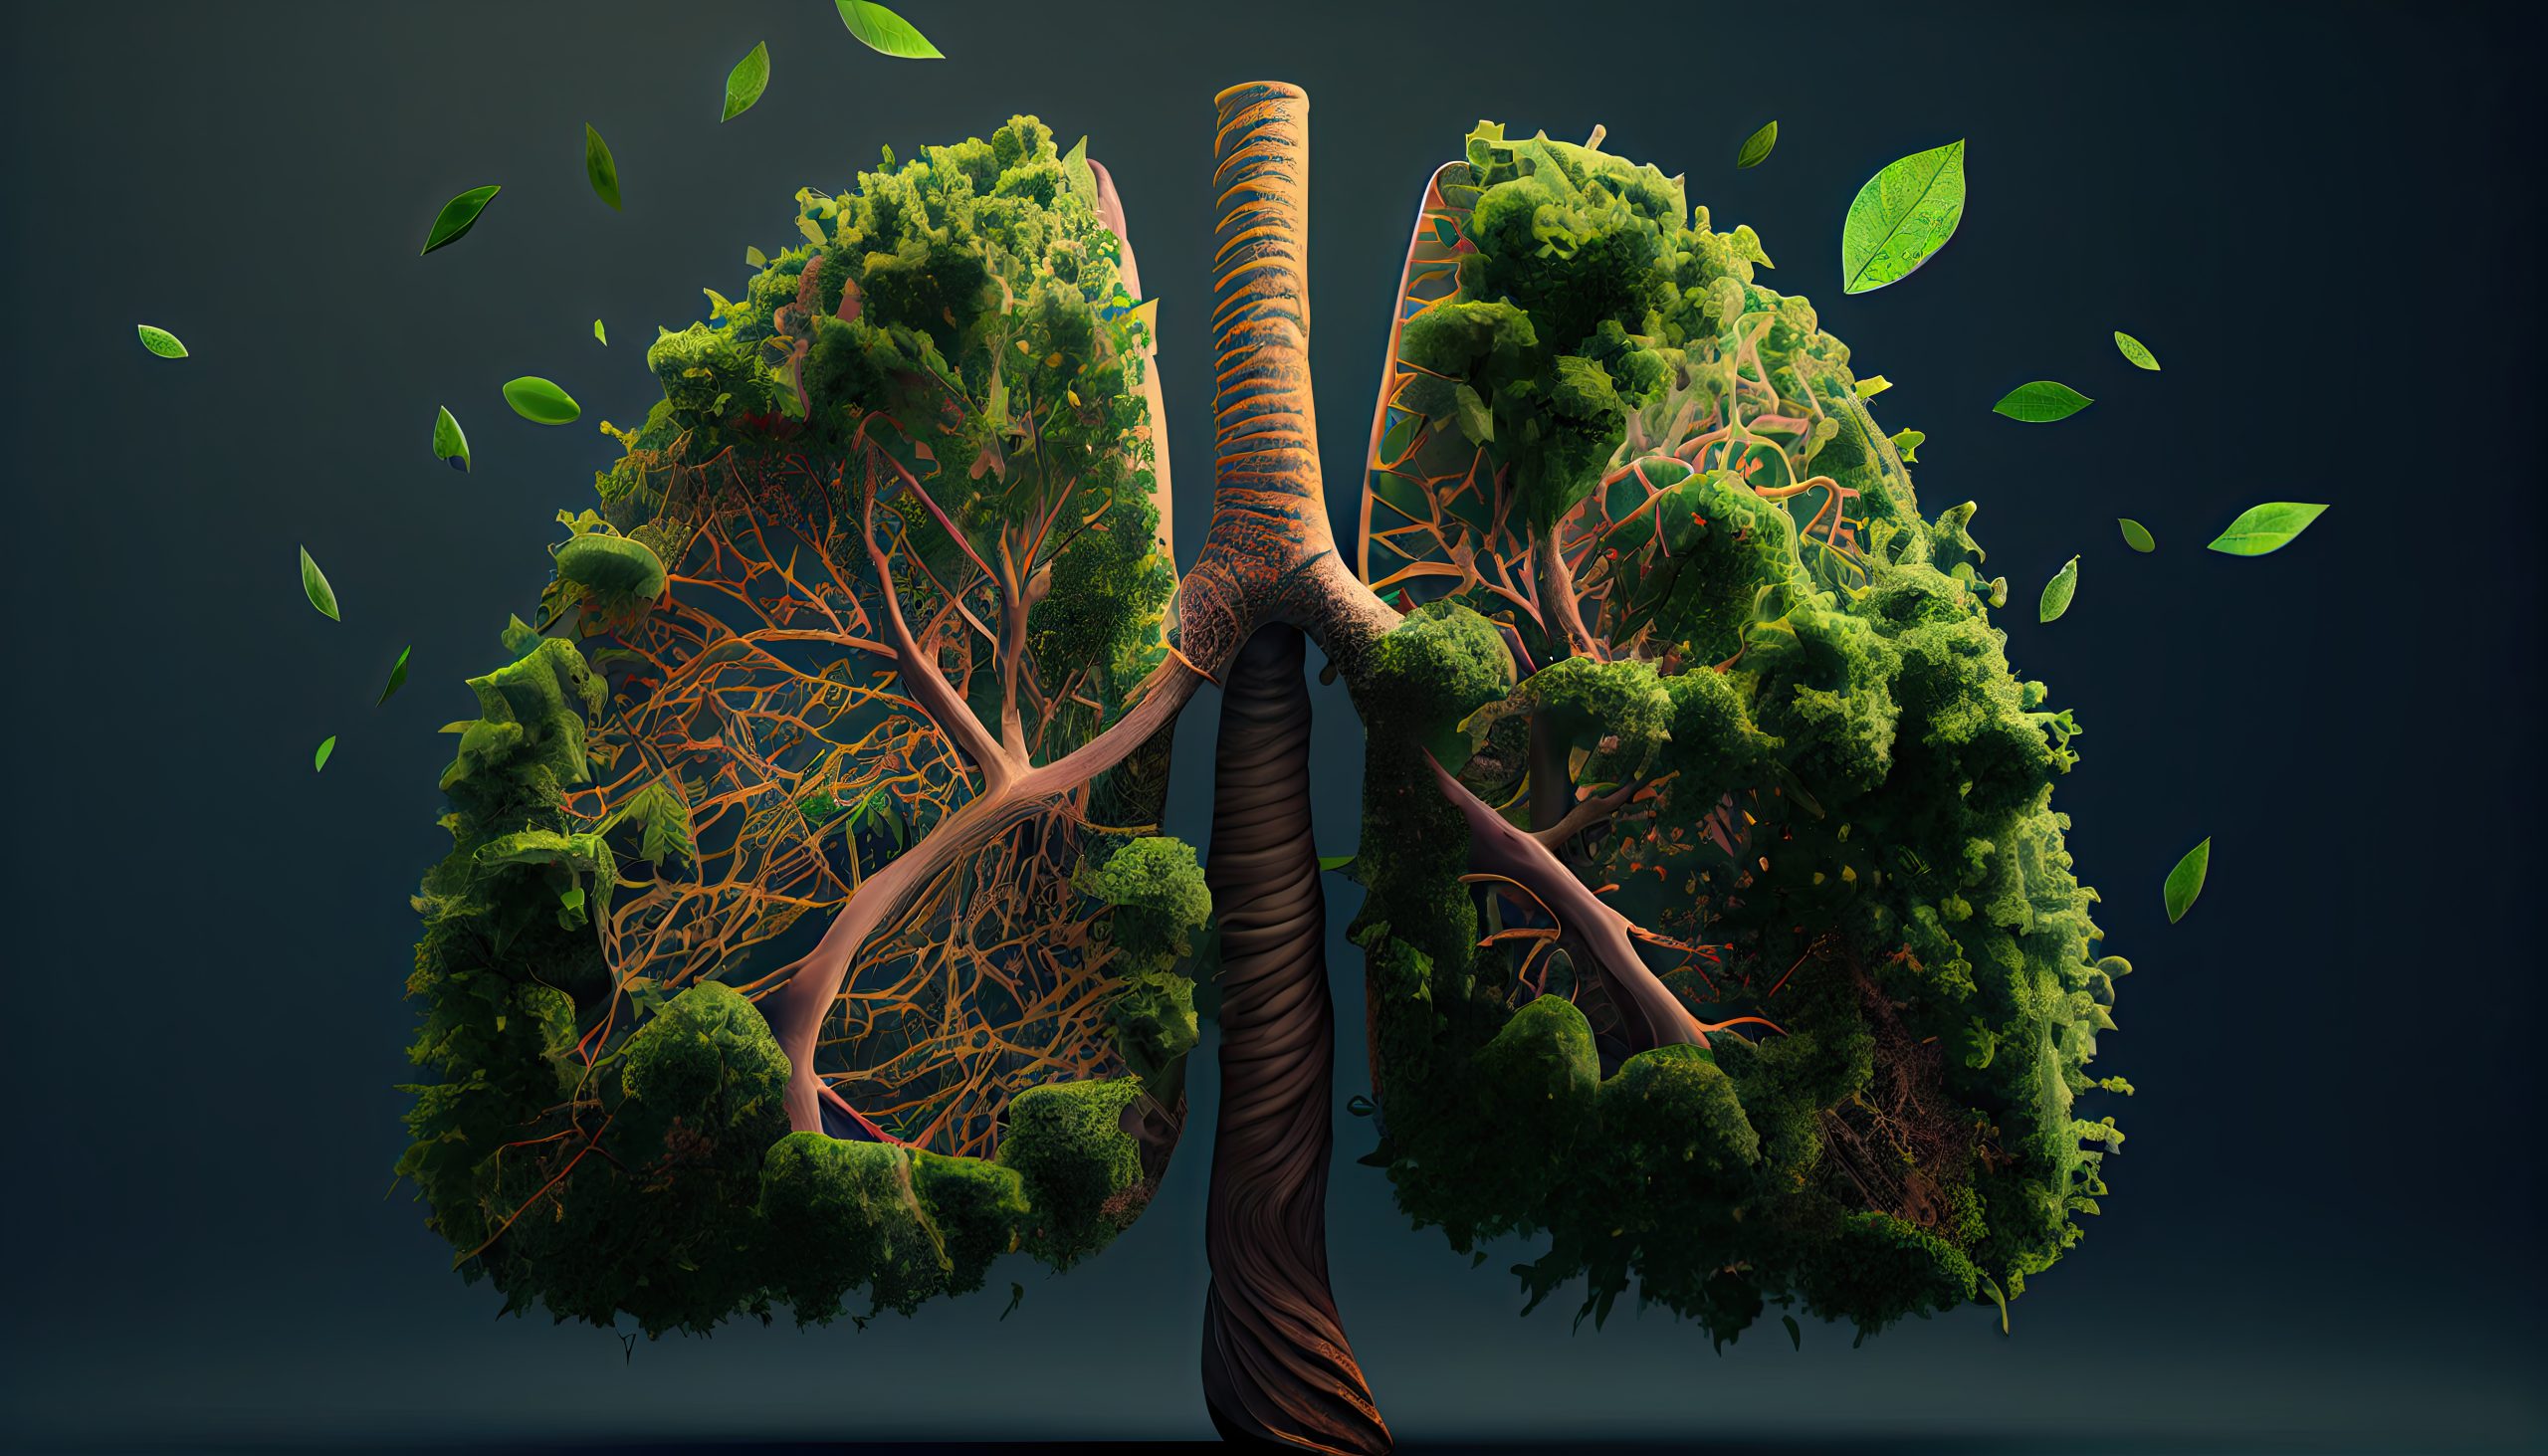 A rare 3-D tree fossil may be the earliest glimpse at a forest understory - Image